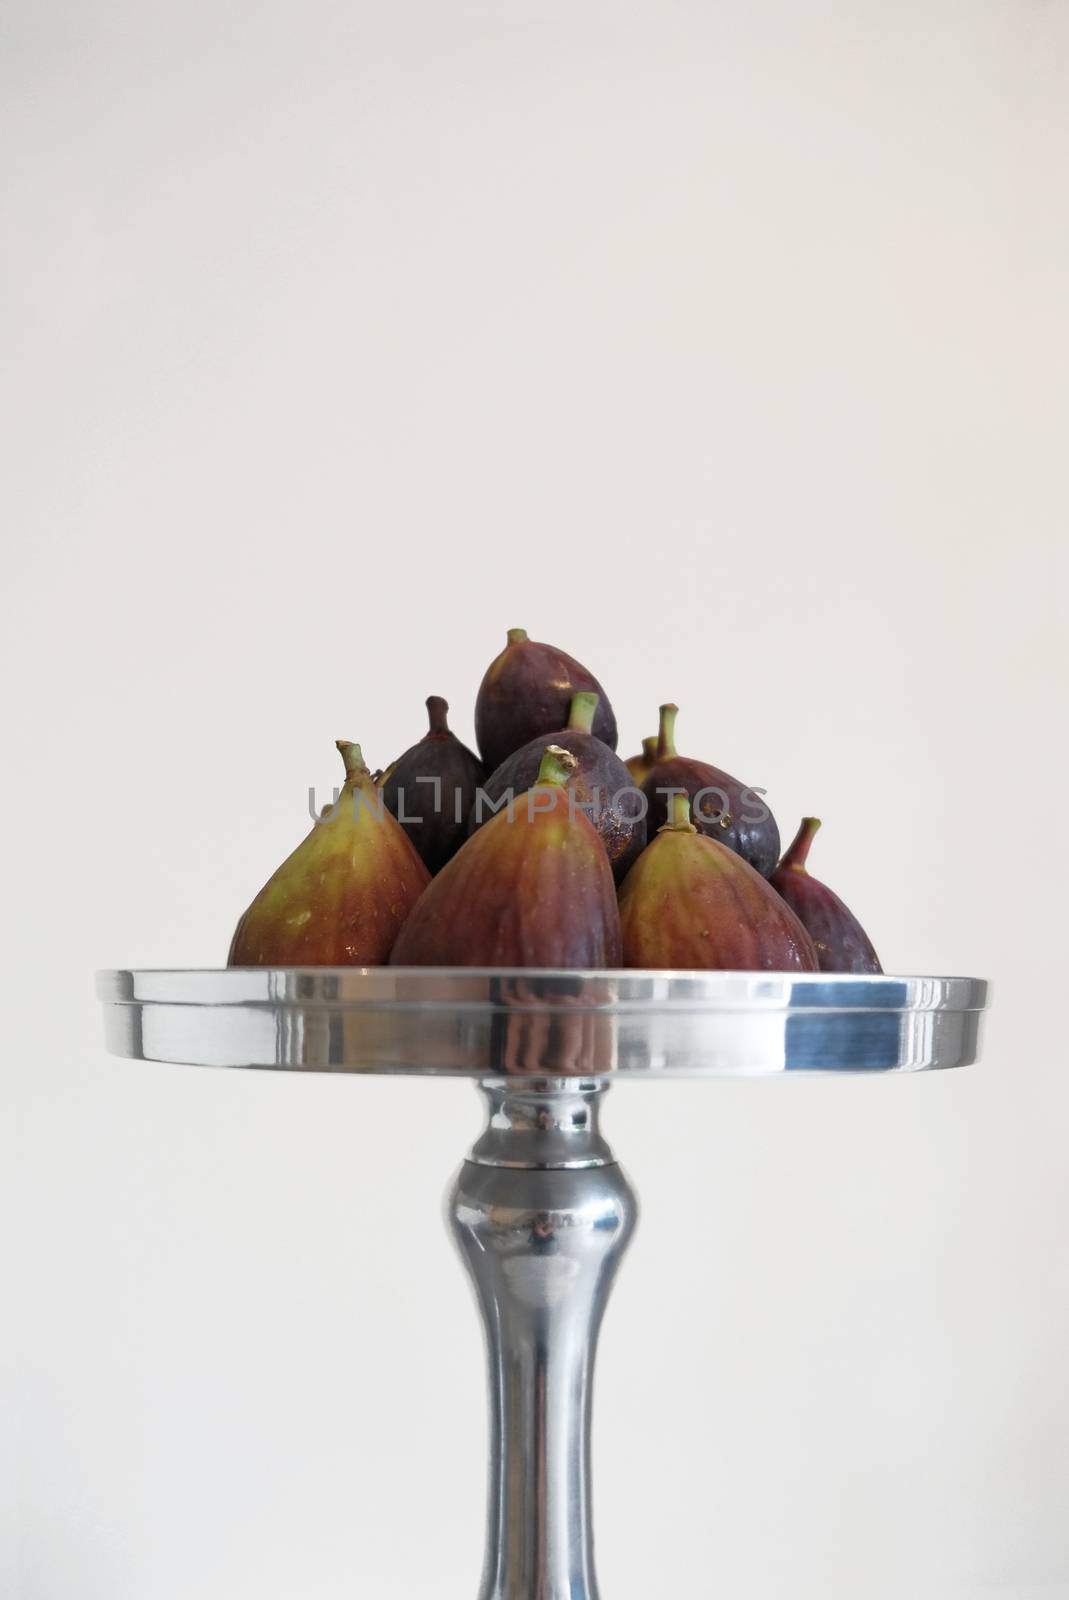 Figs on a stand by mmm